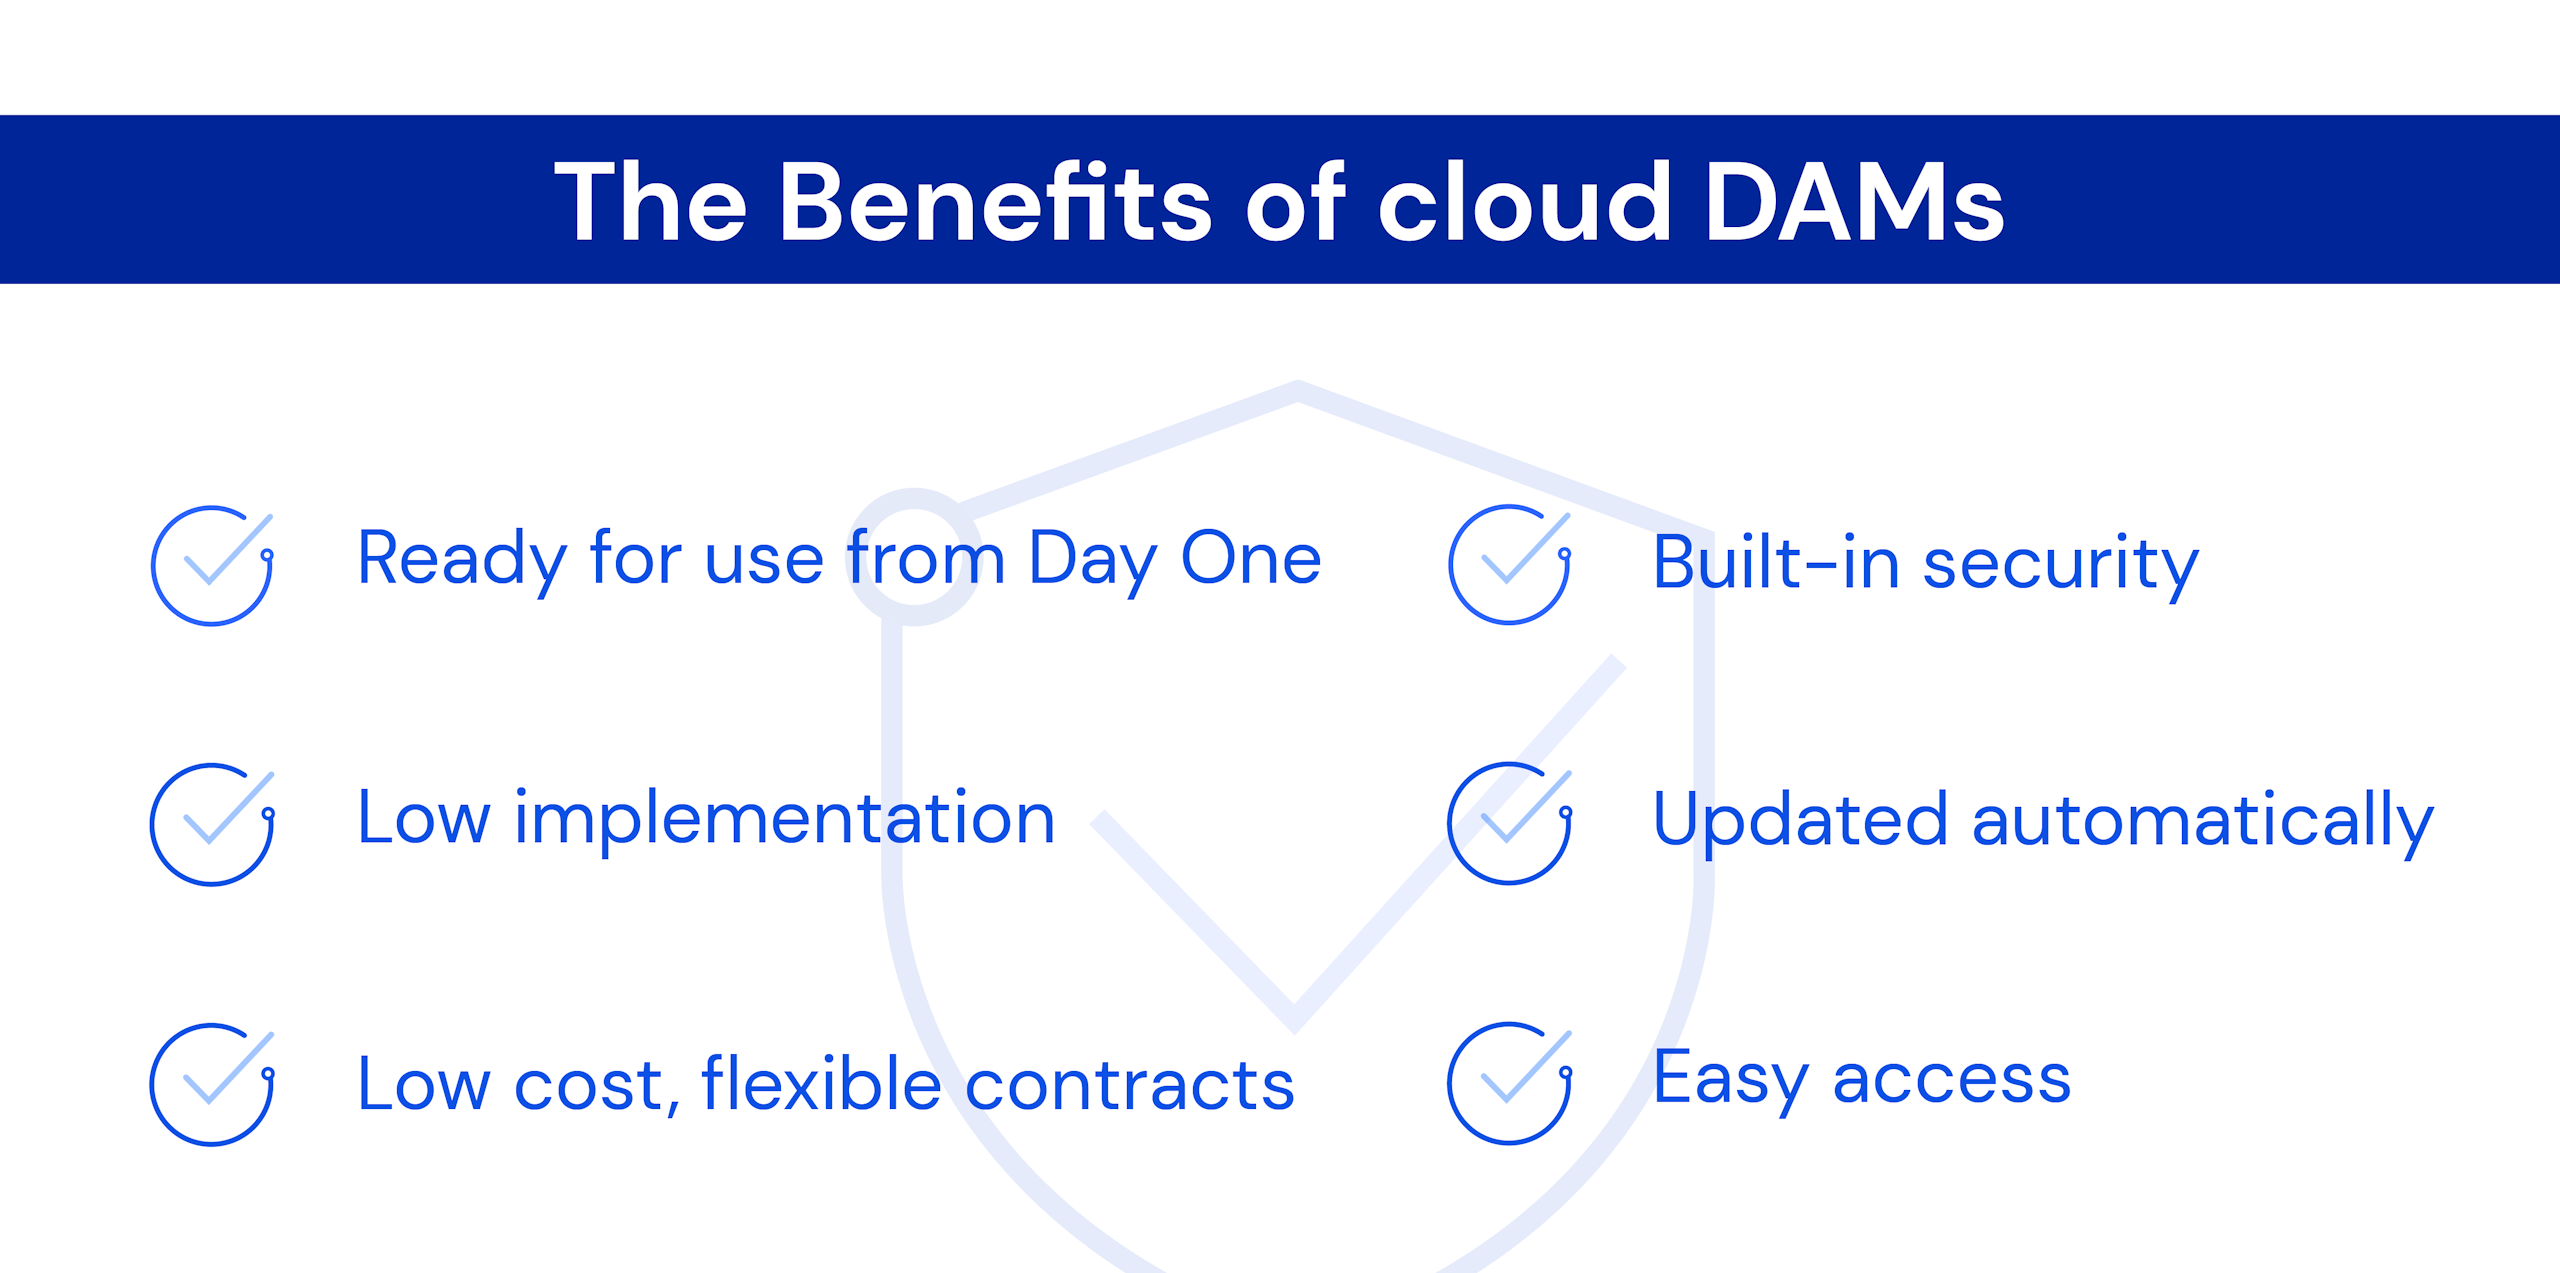 The benefits of cloud DAMs